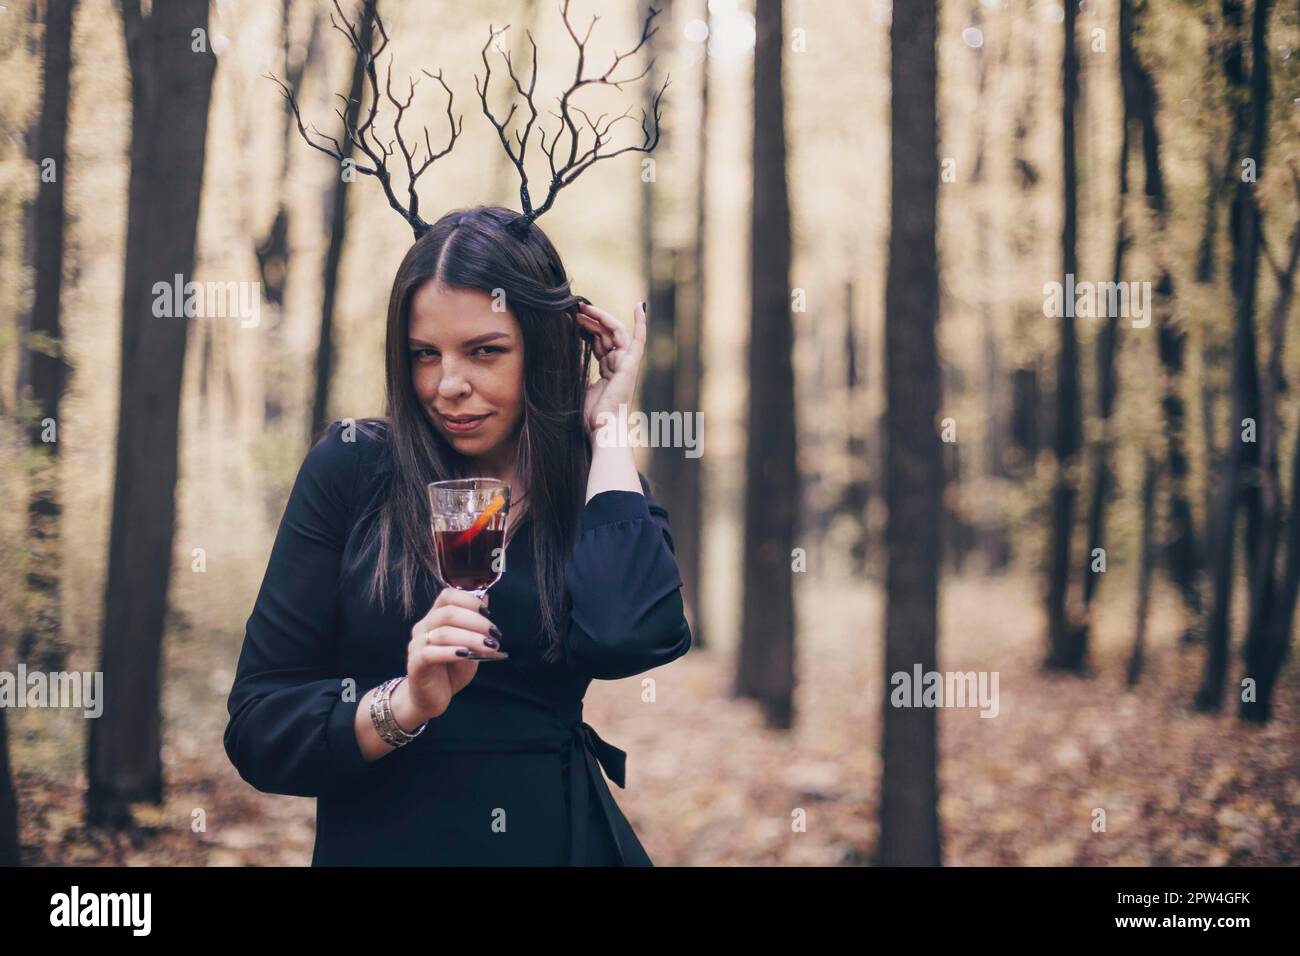 Mysterious woman in black dress wearing gothic deer antlers headband holding mulled wine in glass while standing in autumn forest, looking at camera Stock Photo